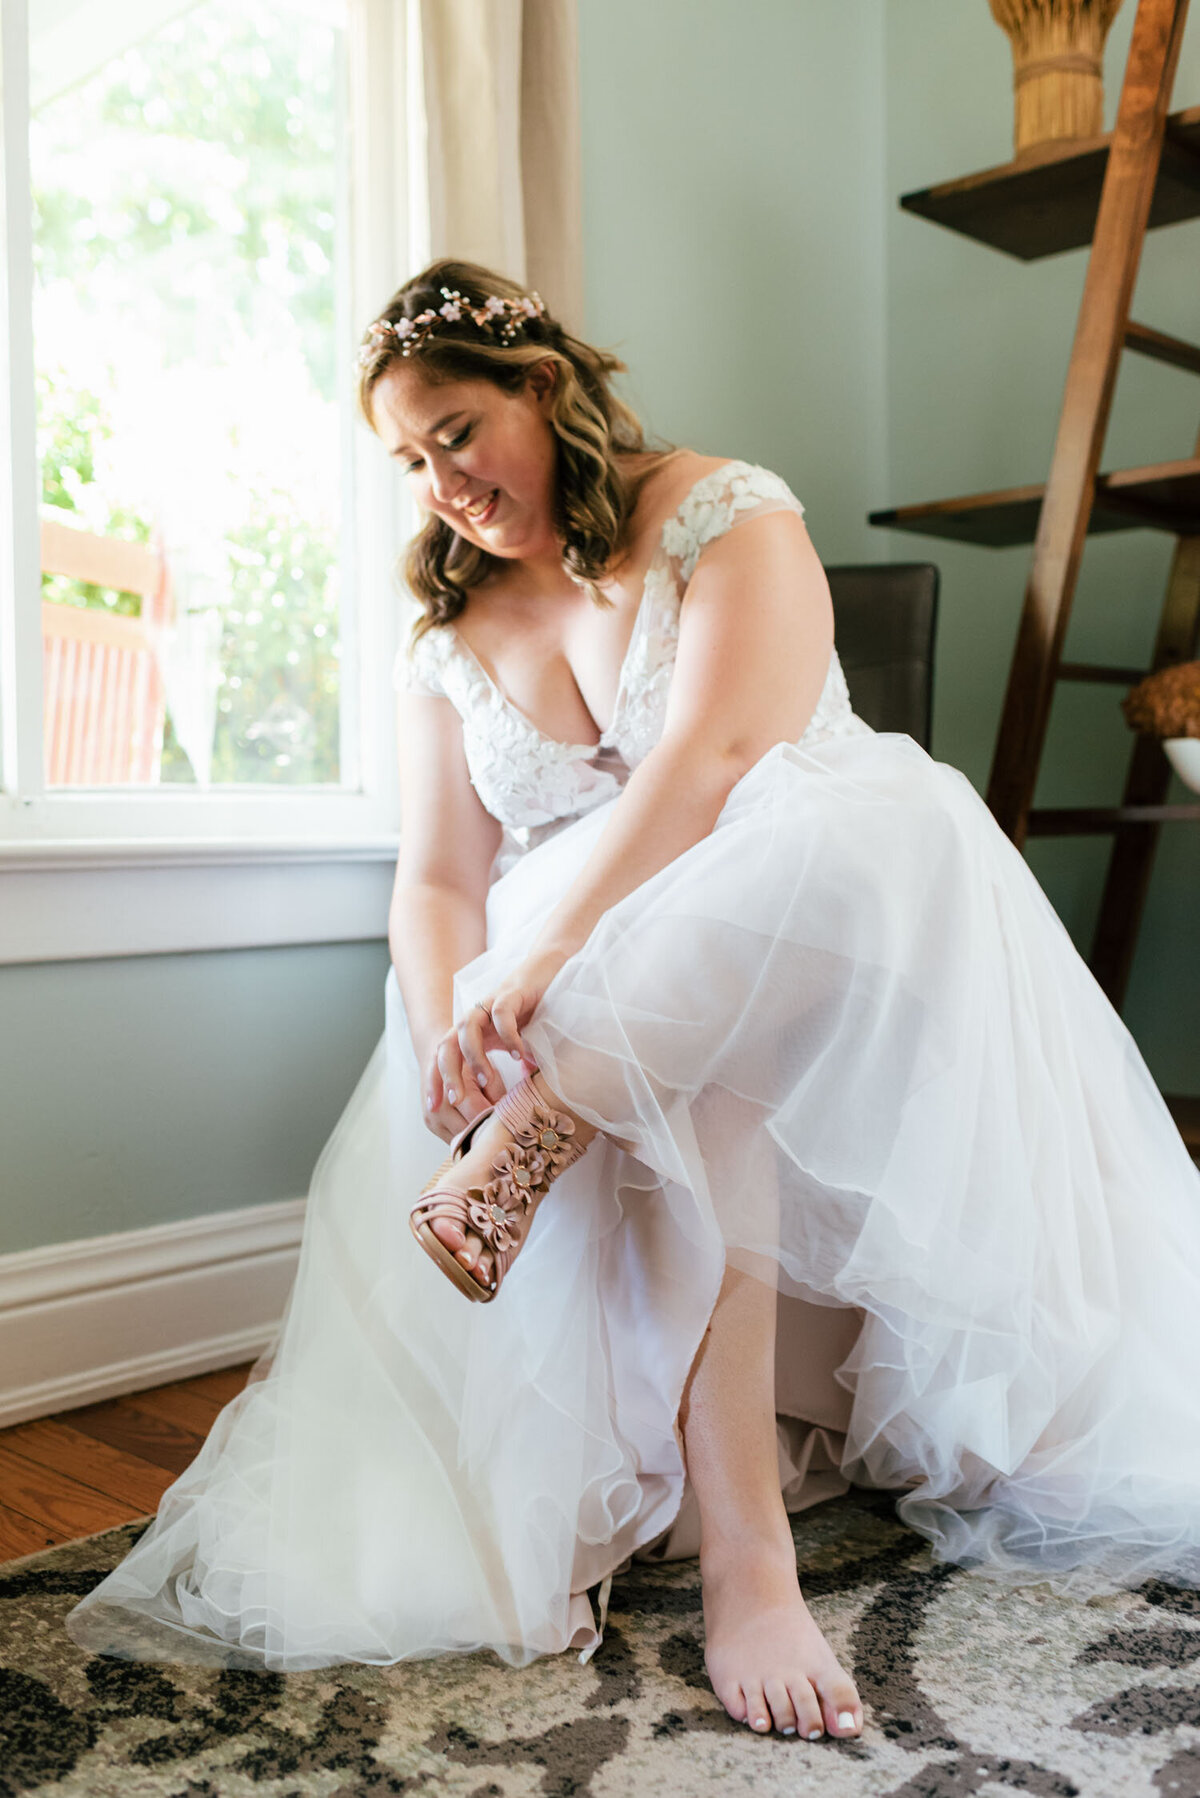 Sarah+Peter Moorhouse Wedding, The Farmstead at Ringoes, East Amwell Township NJ, Nichole Tippin Photography-31